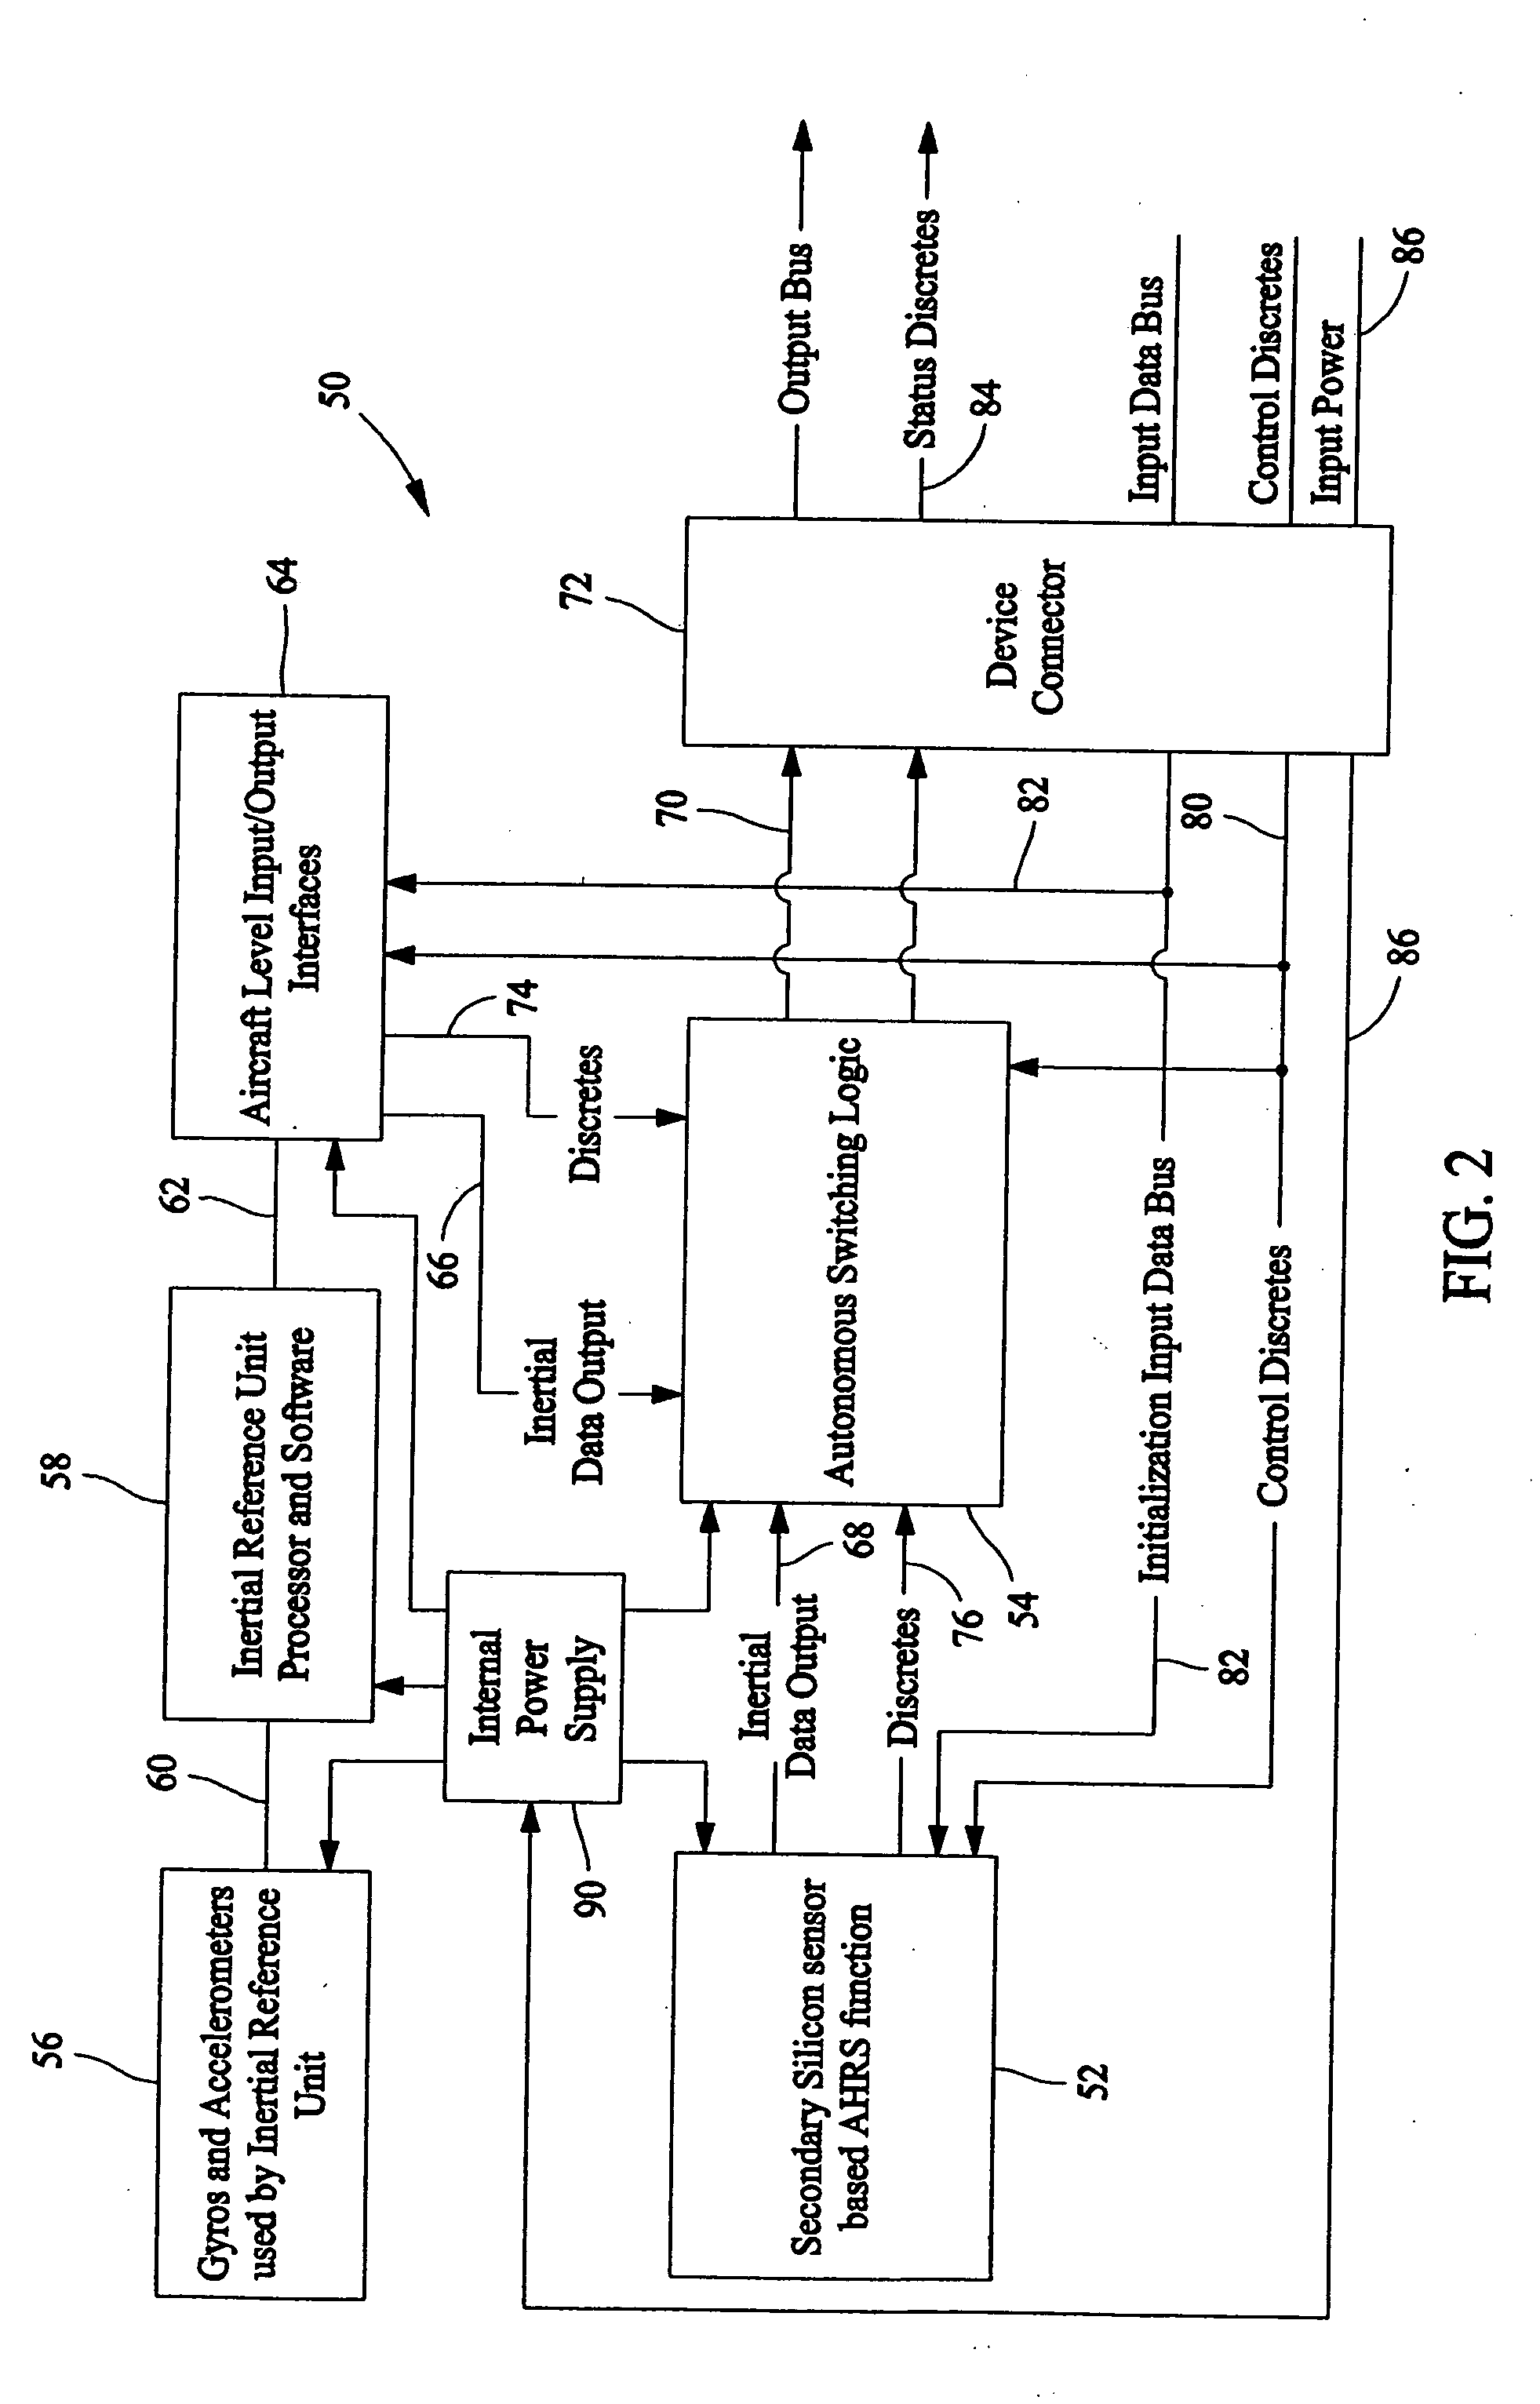 Inertial reference unit with internal backup attitude heading reference system